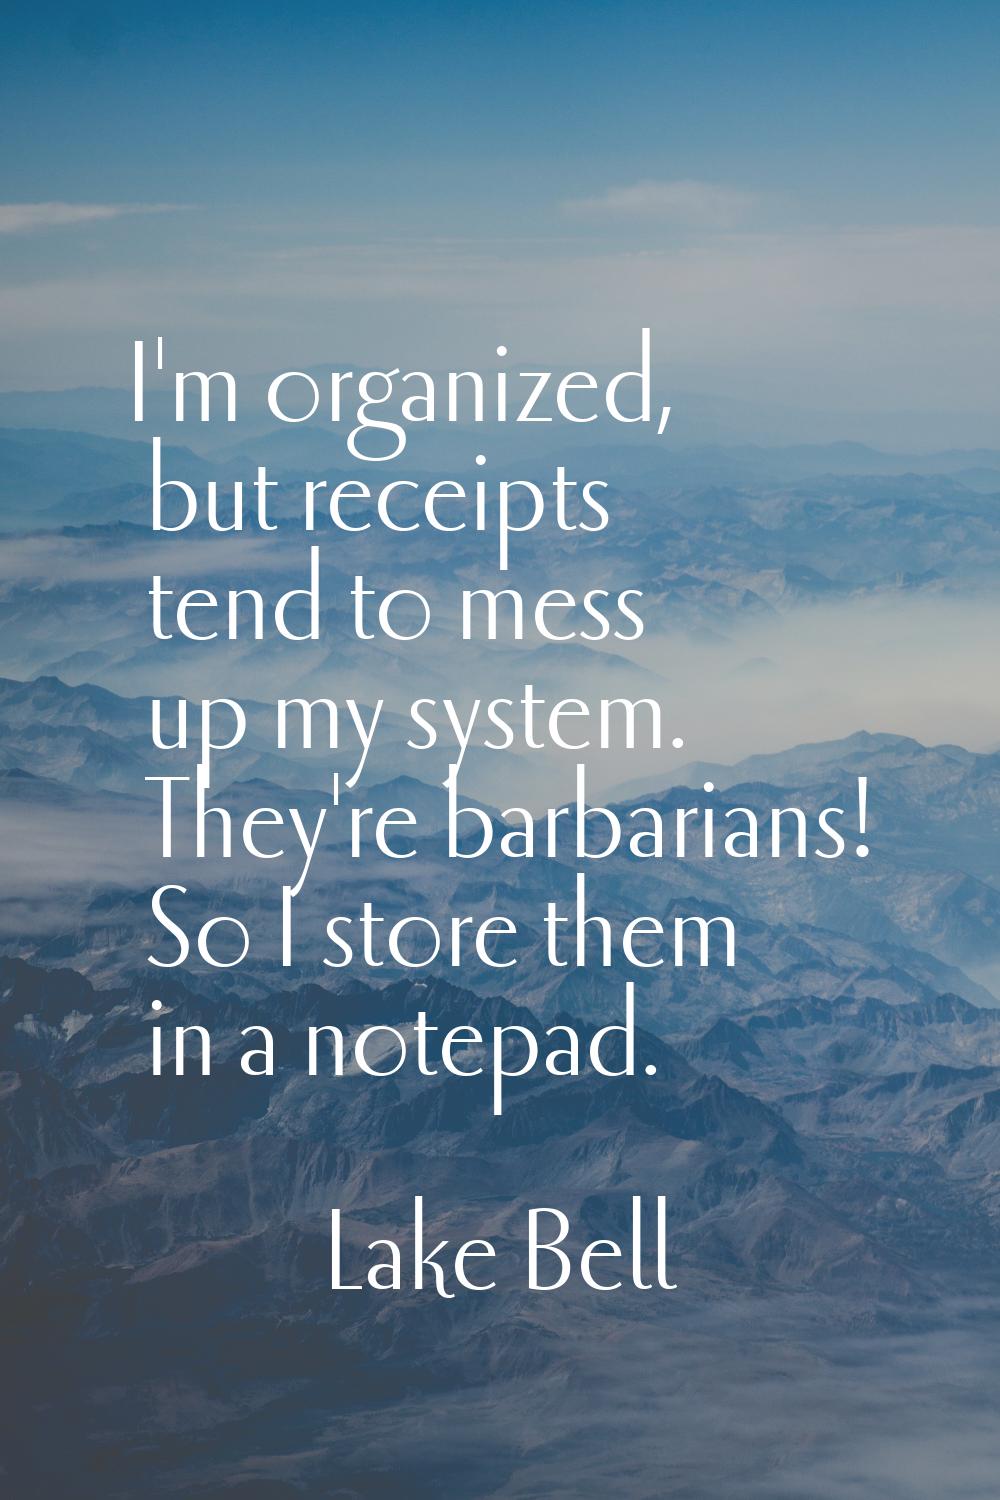 I'm organized, but receipts tend to mess up my system. They're barbarians! So I store them in a not